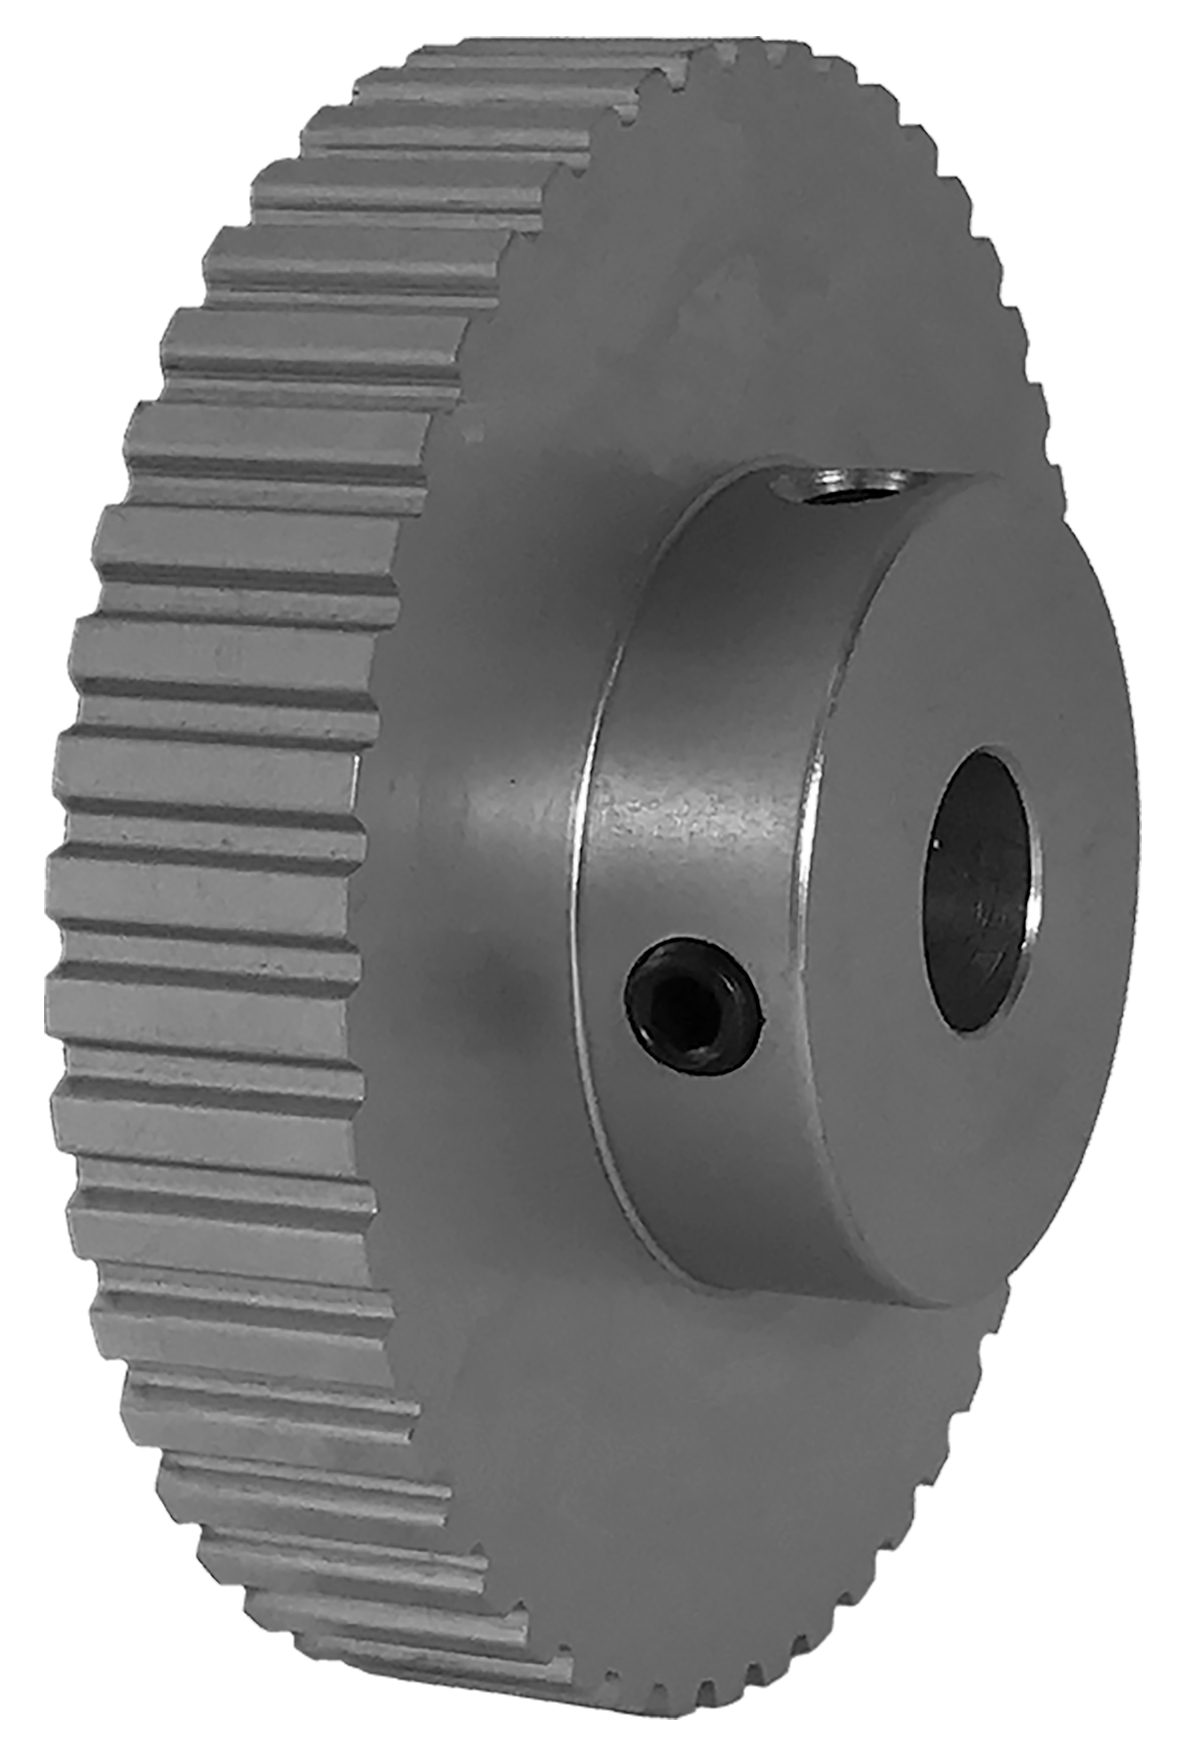 48XL037-6A6 - Aluminum Imperial Pitch Pulleys